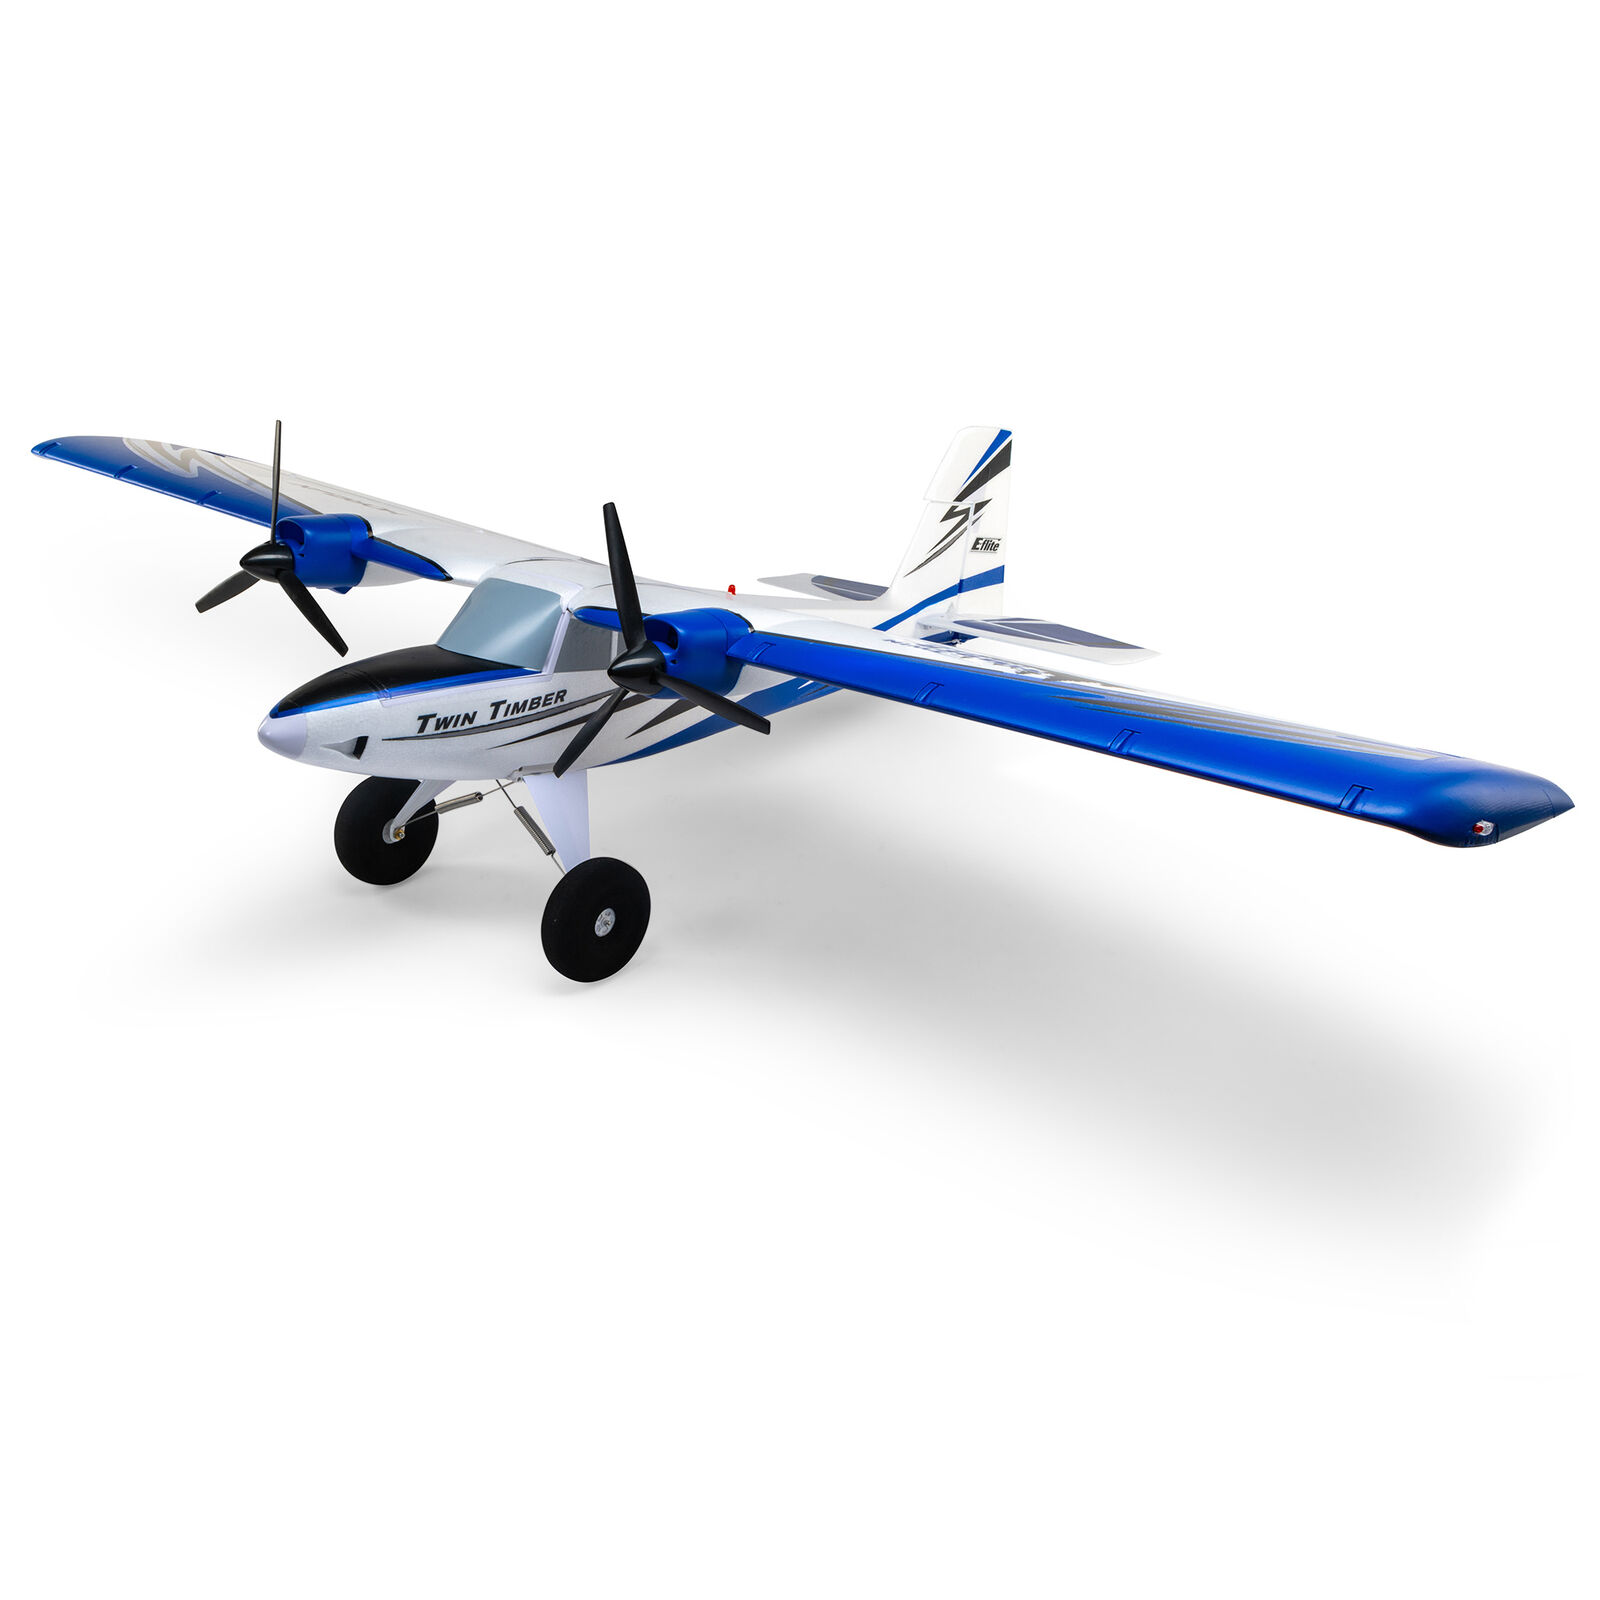 E-flite EFL23850 - Twin Timber 1.6m BNF Basic with AS3X and SAFE Select